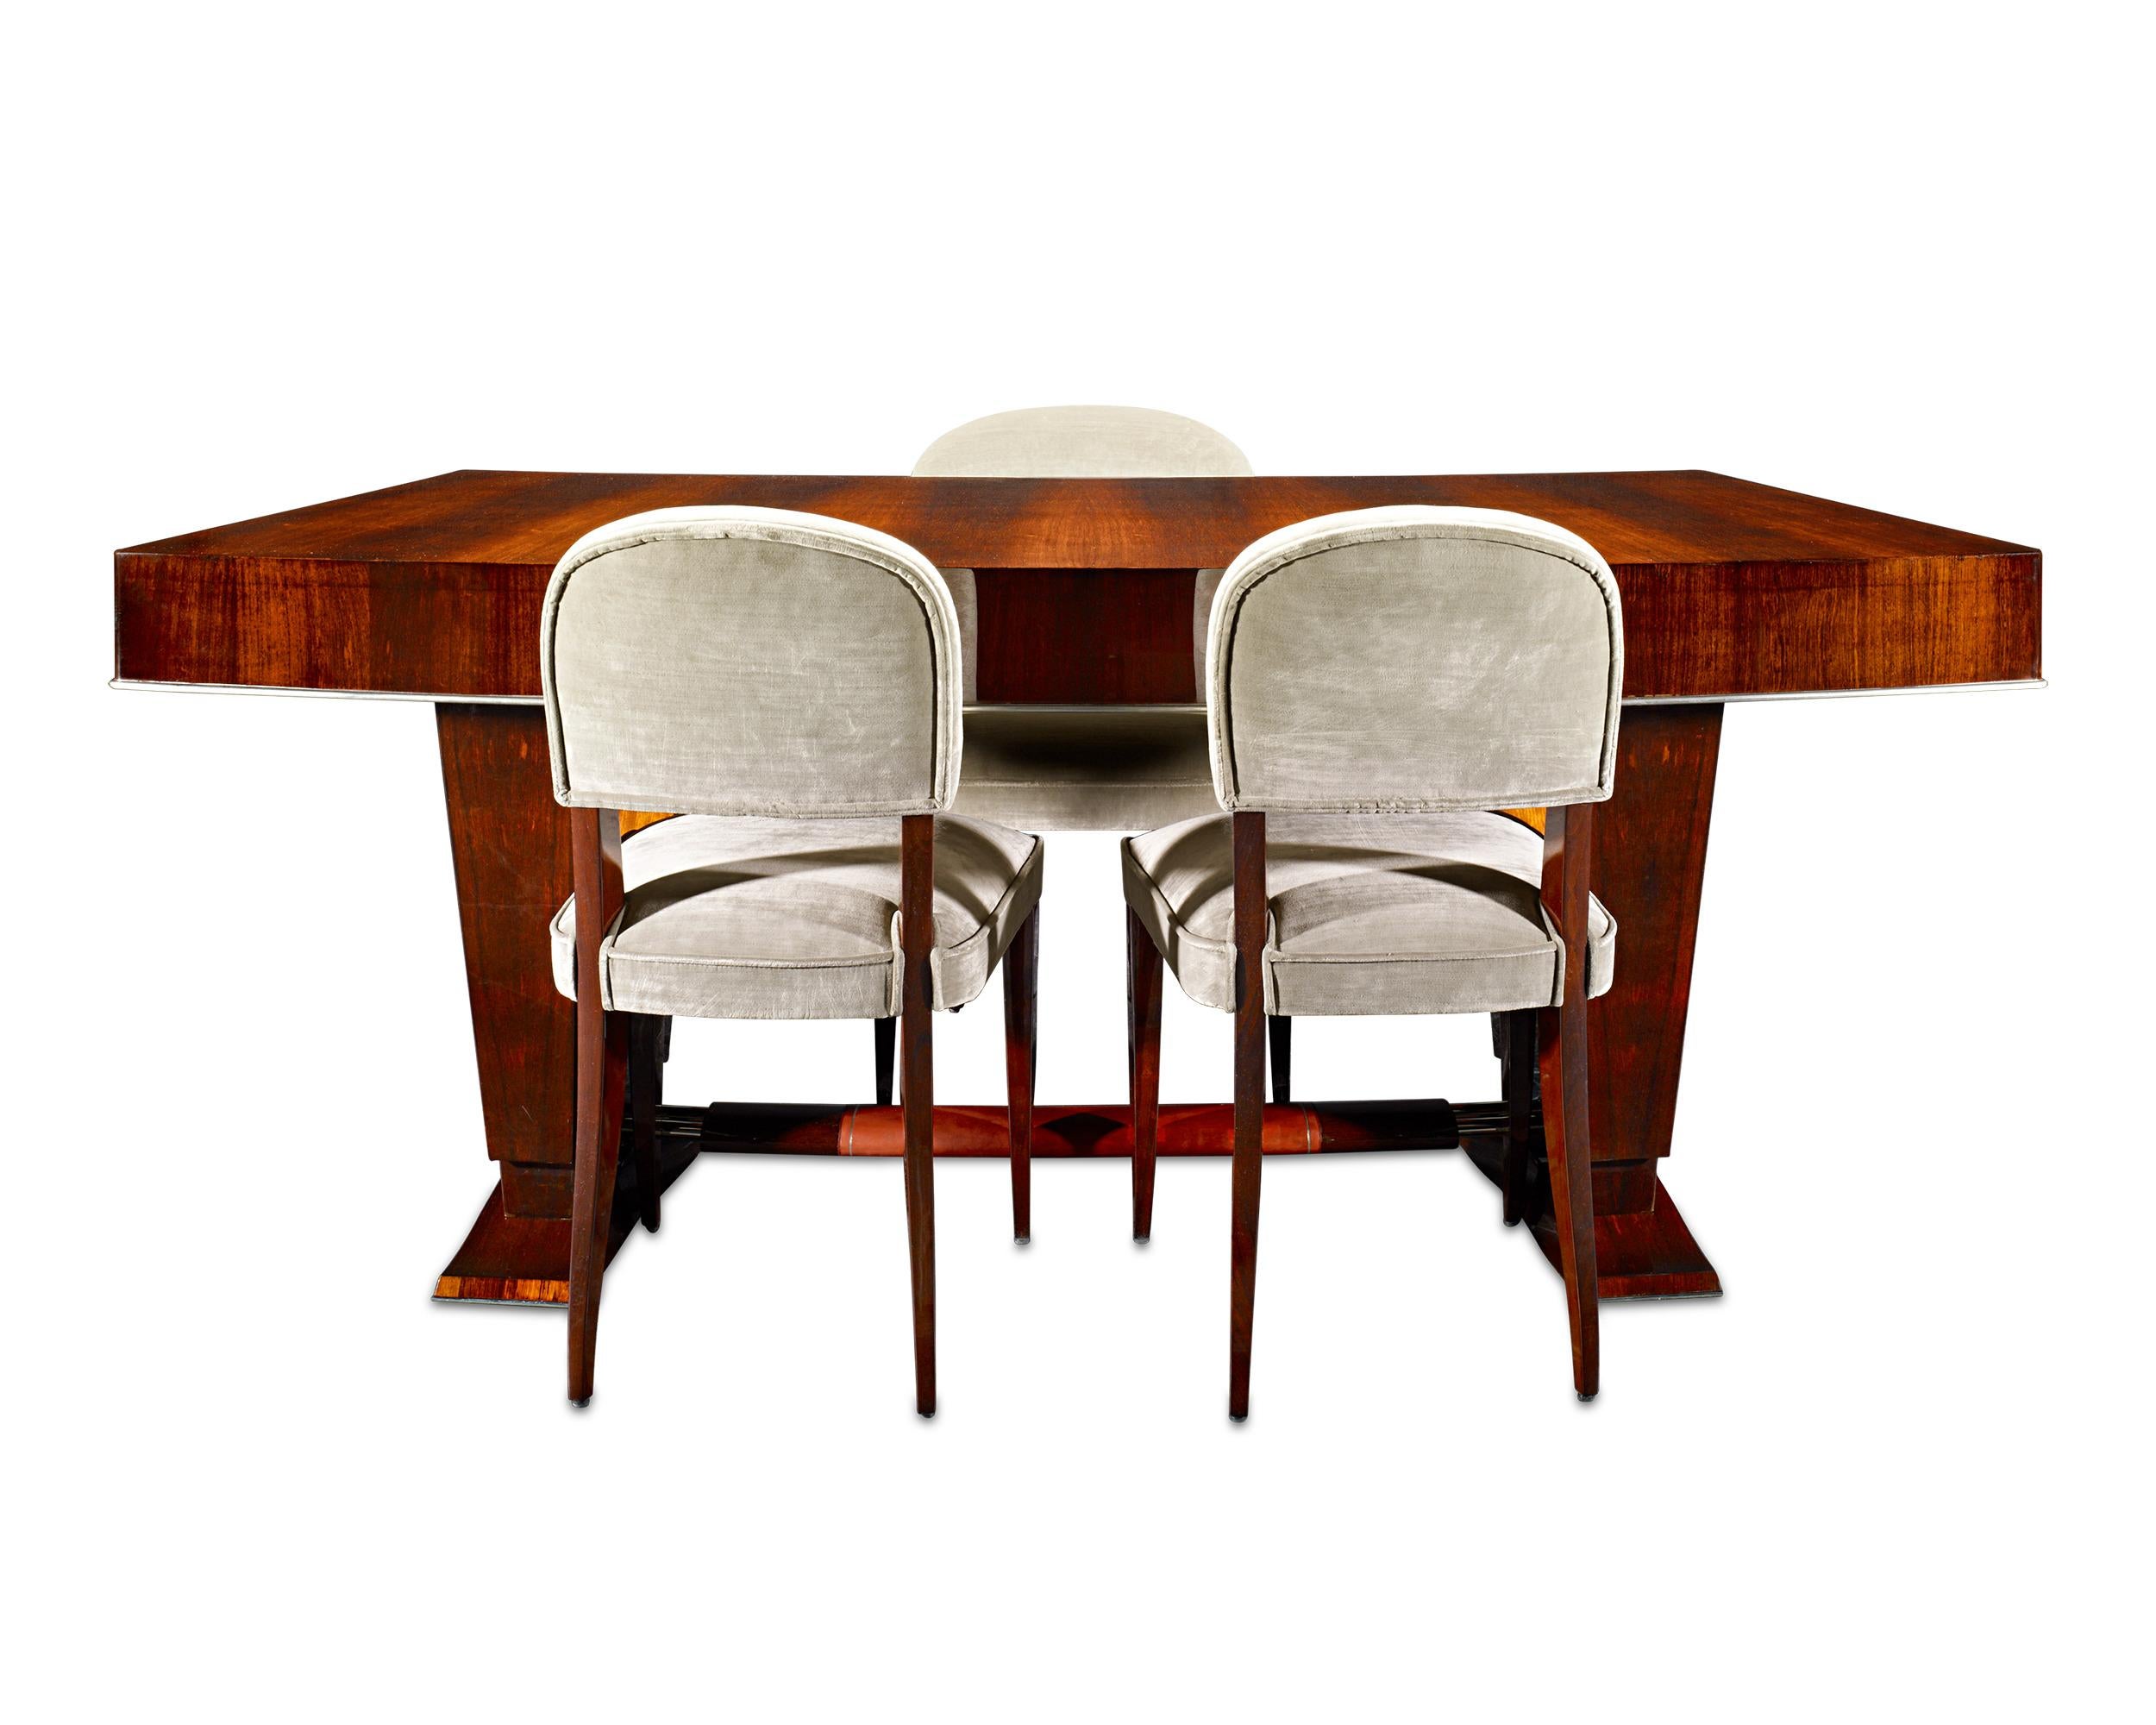 This timeless chair and desk set features the iconic designs of two French Art Deco greats, Jules Leleu and Maxime Old. Together, the chic set epitomizes the fluid elegance of this period’s best furniture suites. The three chairs by Jules Leleu are